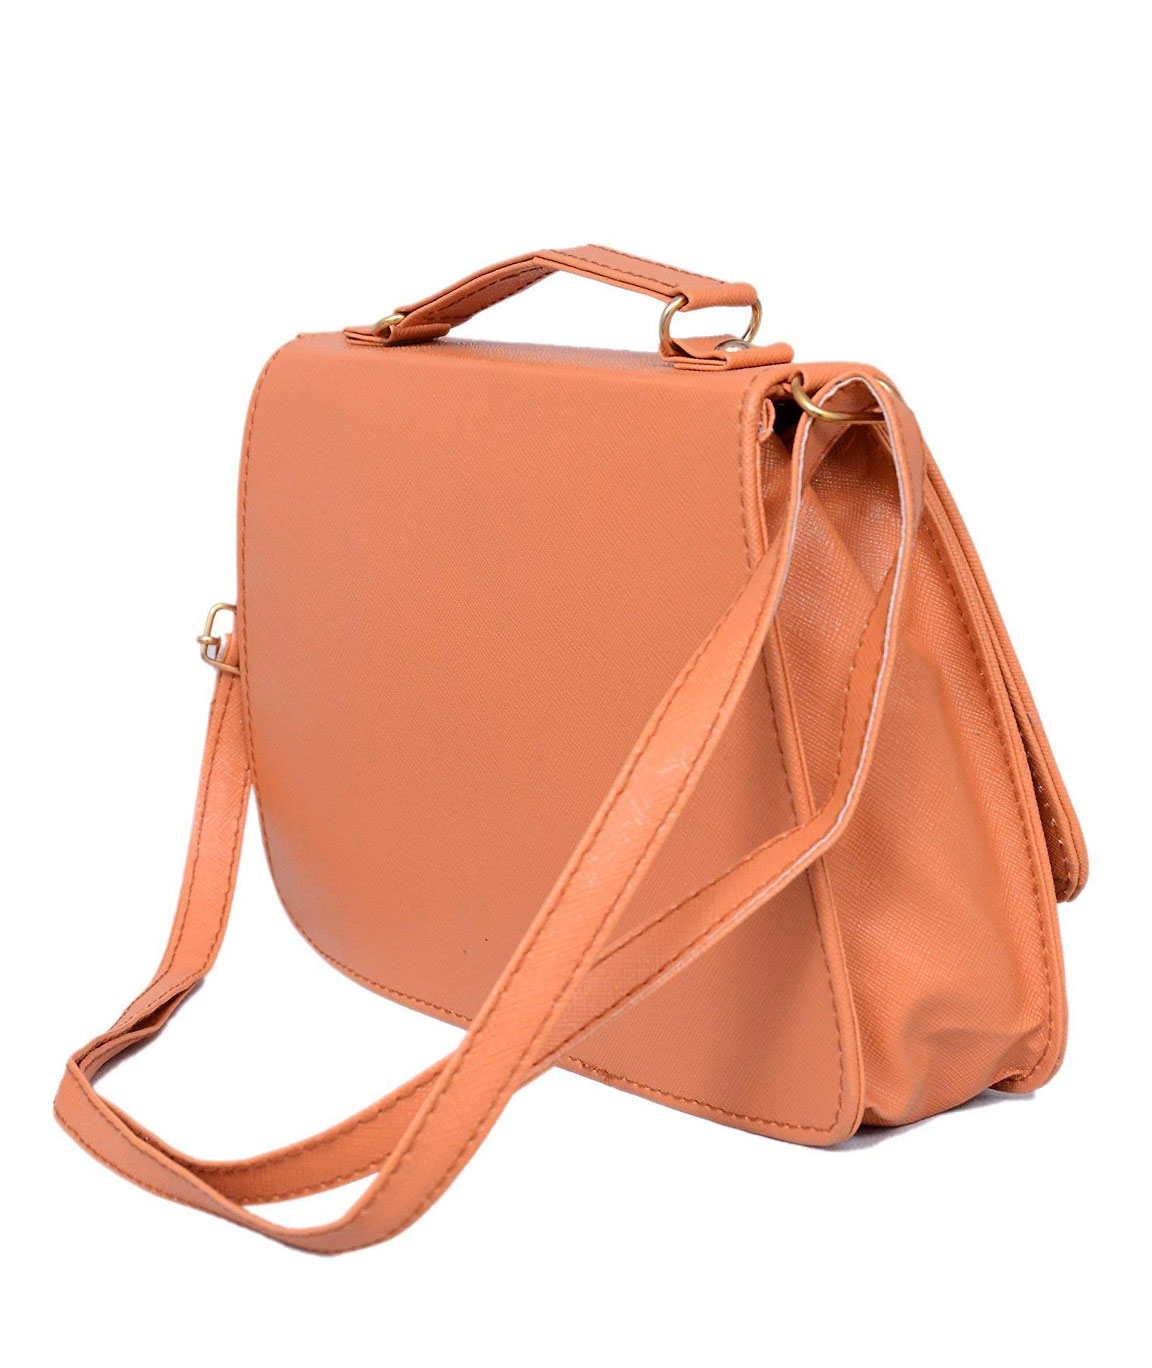 fcity.in - Hand Bags For Mothers Handbags For Women Handbag For Women And